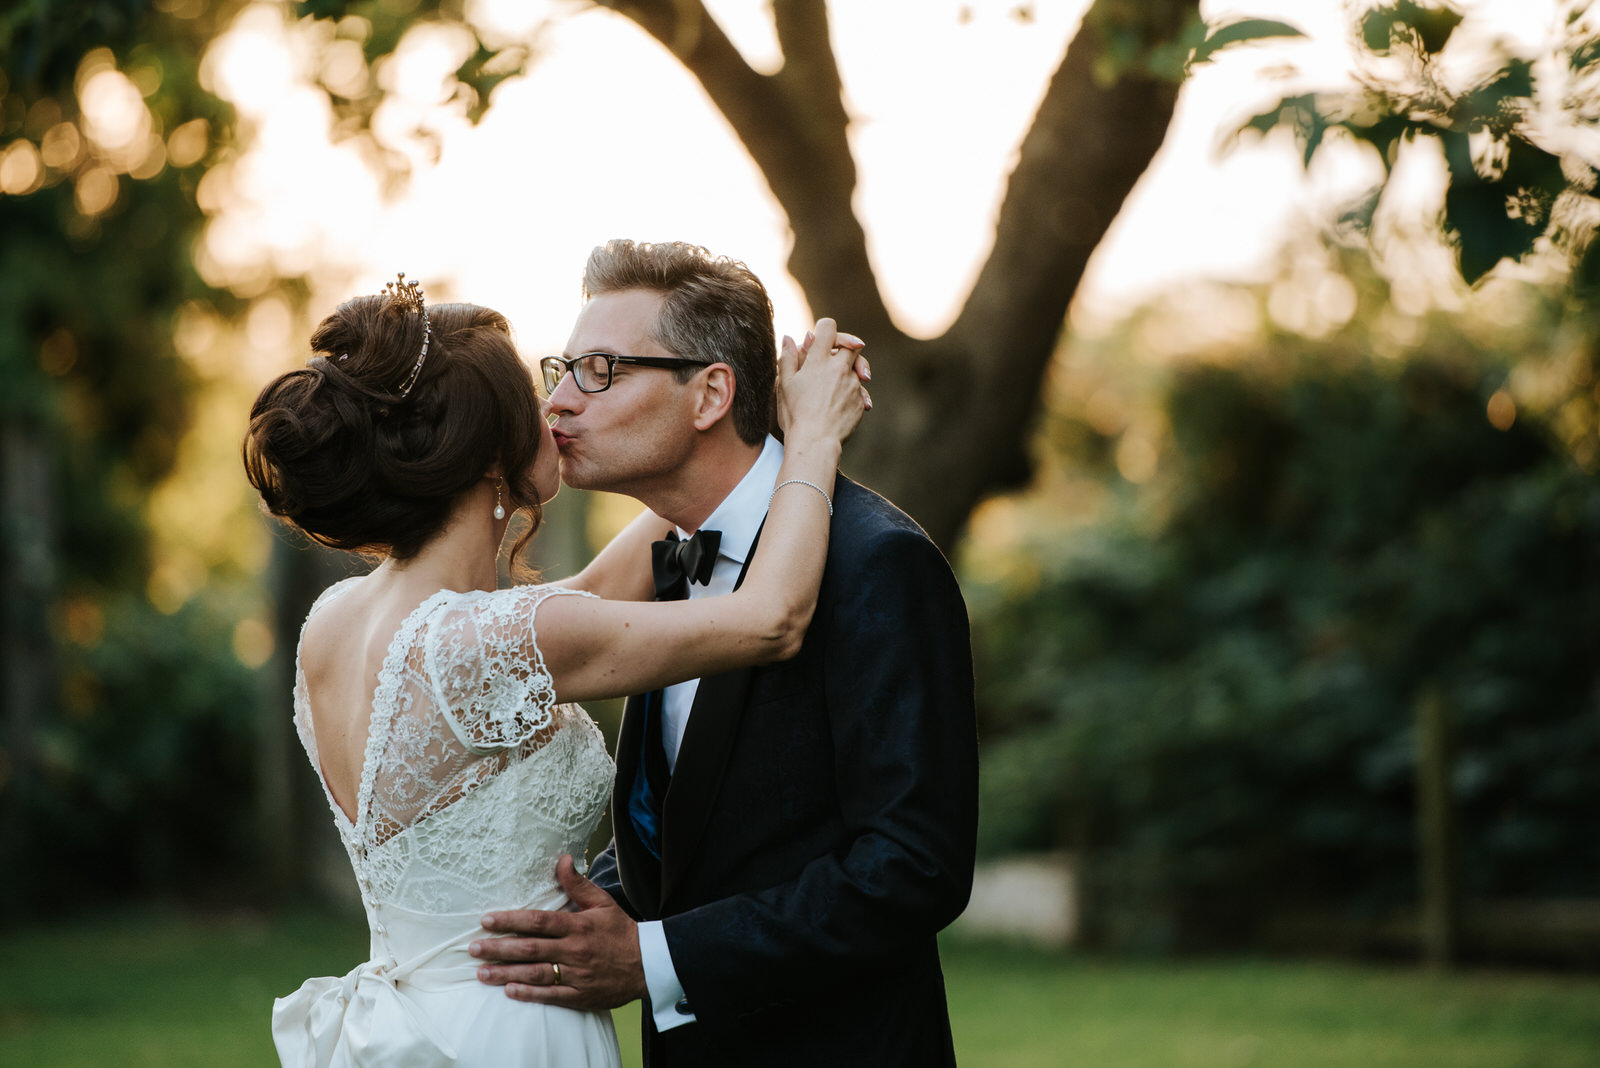 Bride and groom kiss in front of tree during portraits as sun se